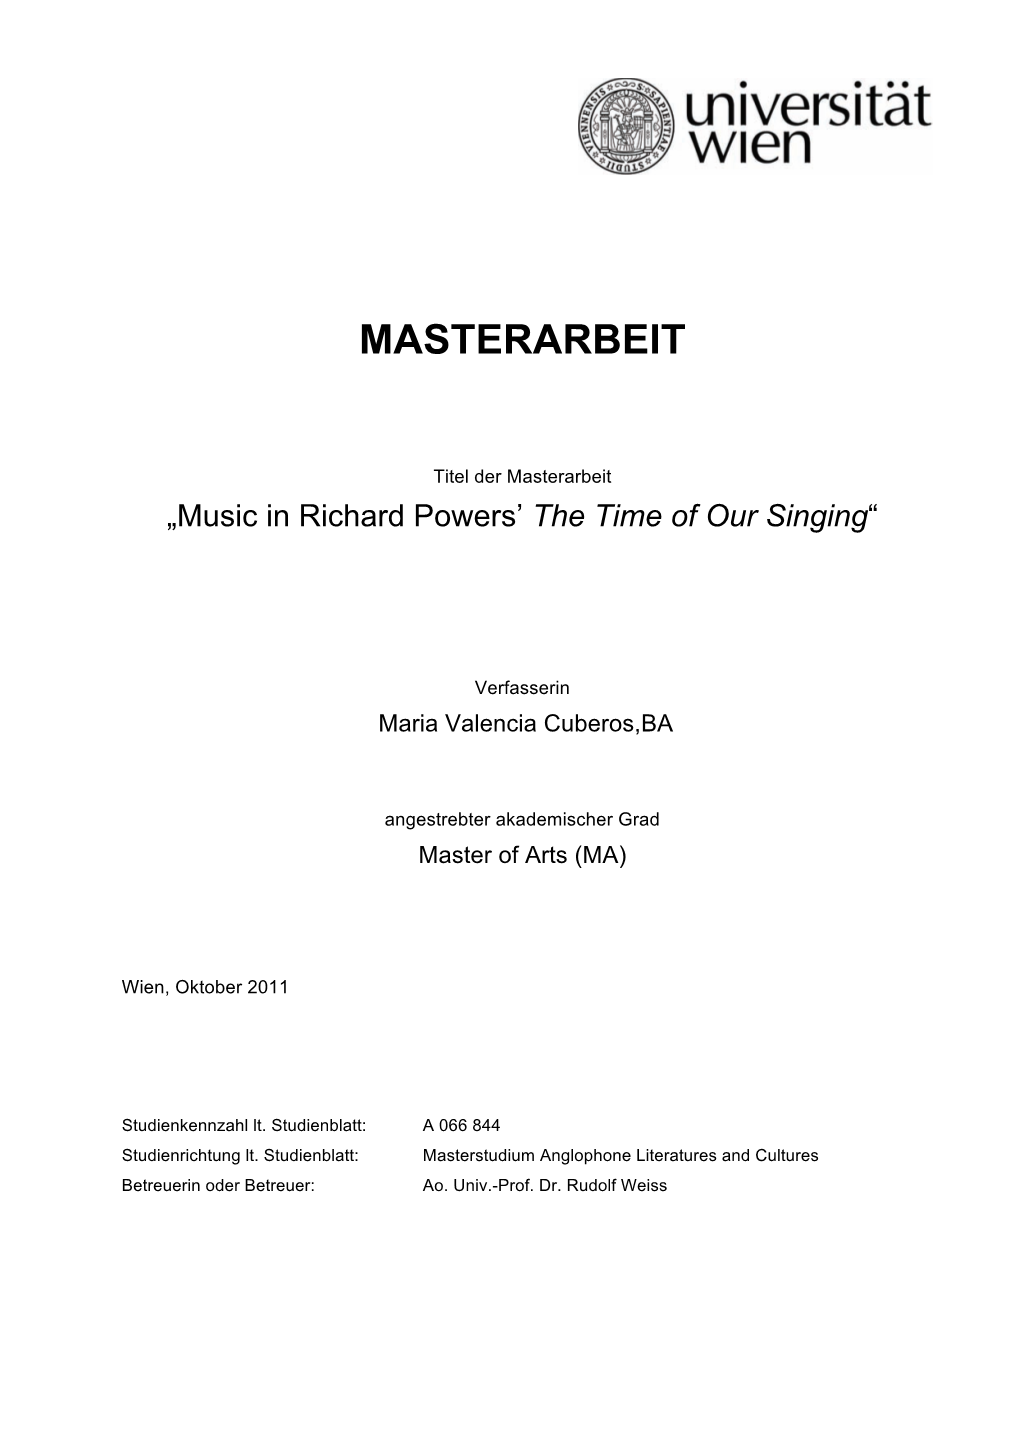 Music in Richard Powers' the Time of Our Singing